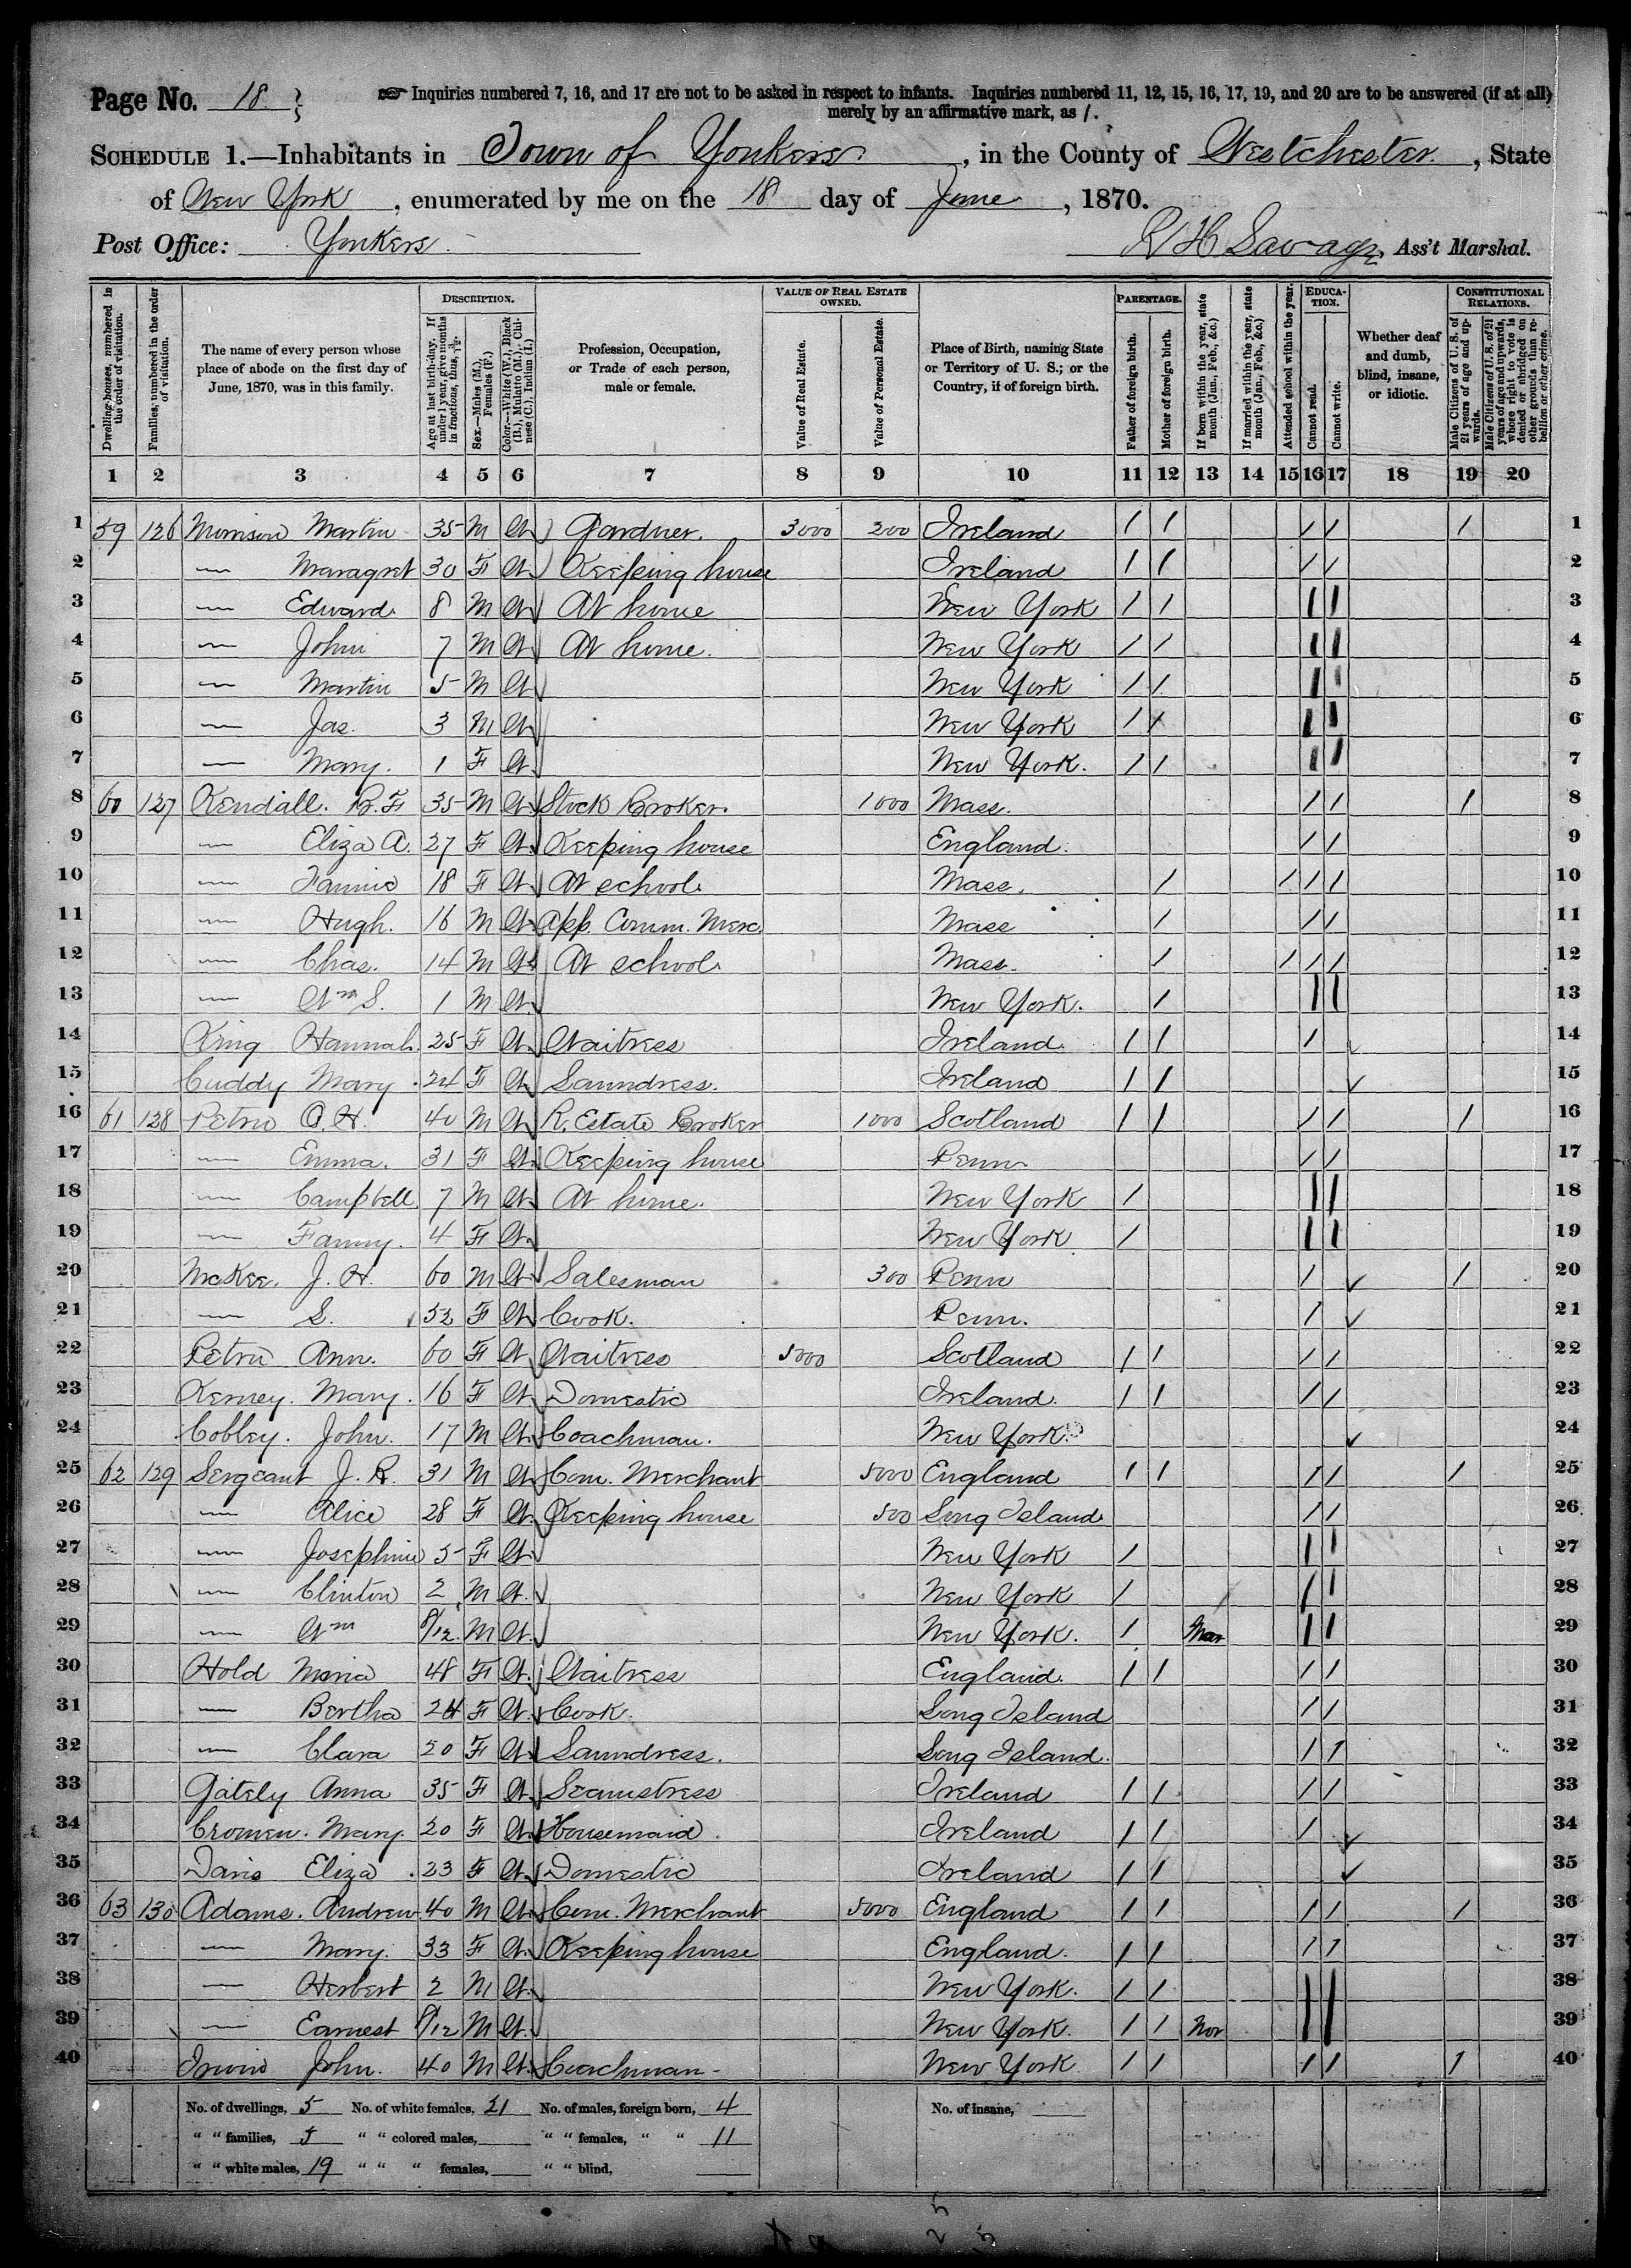 1870 federal census for Yonkers, Kendall family listing